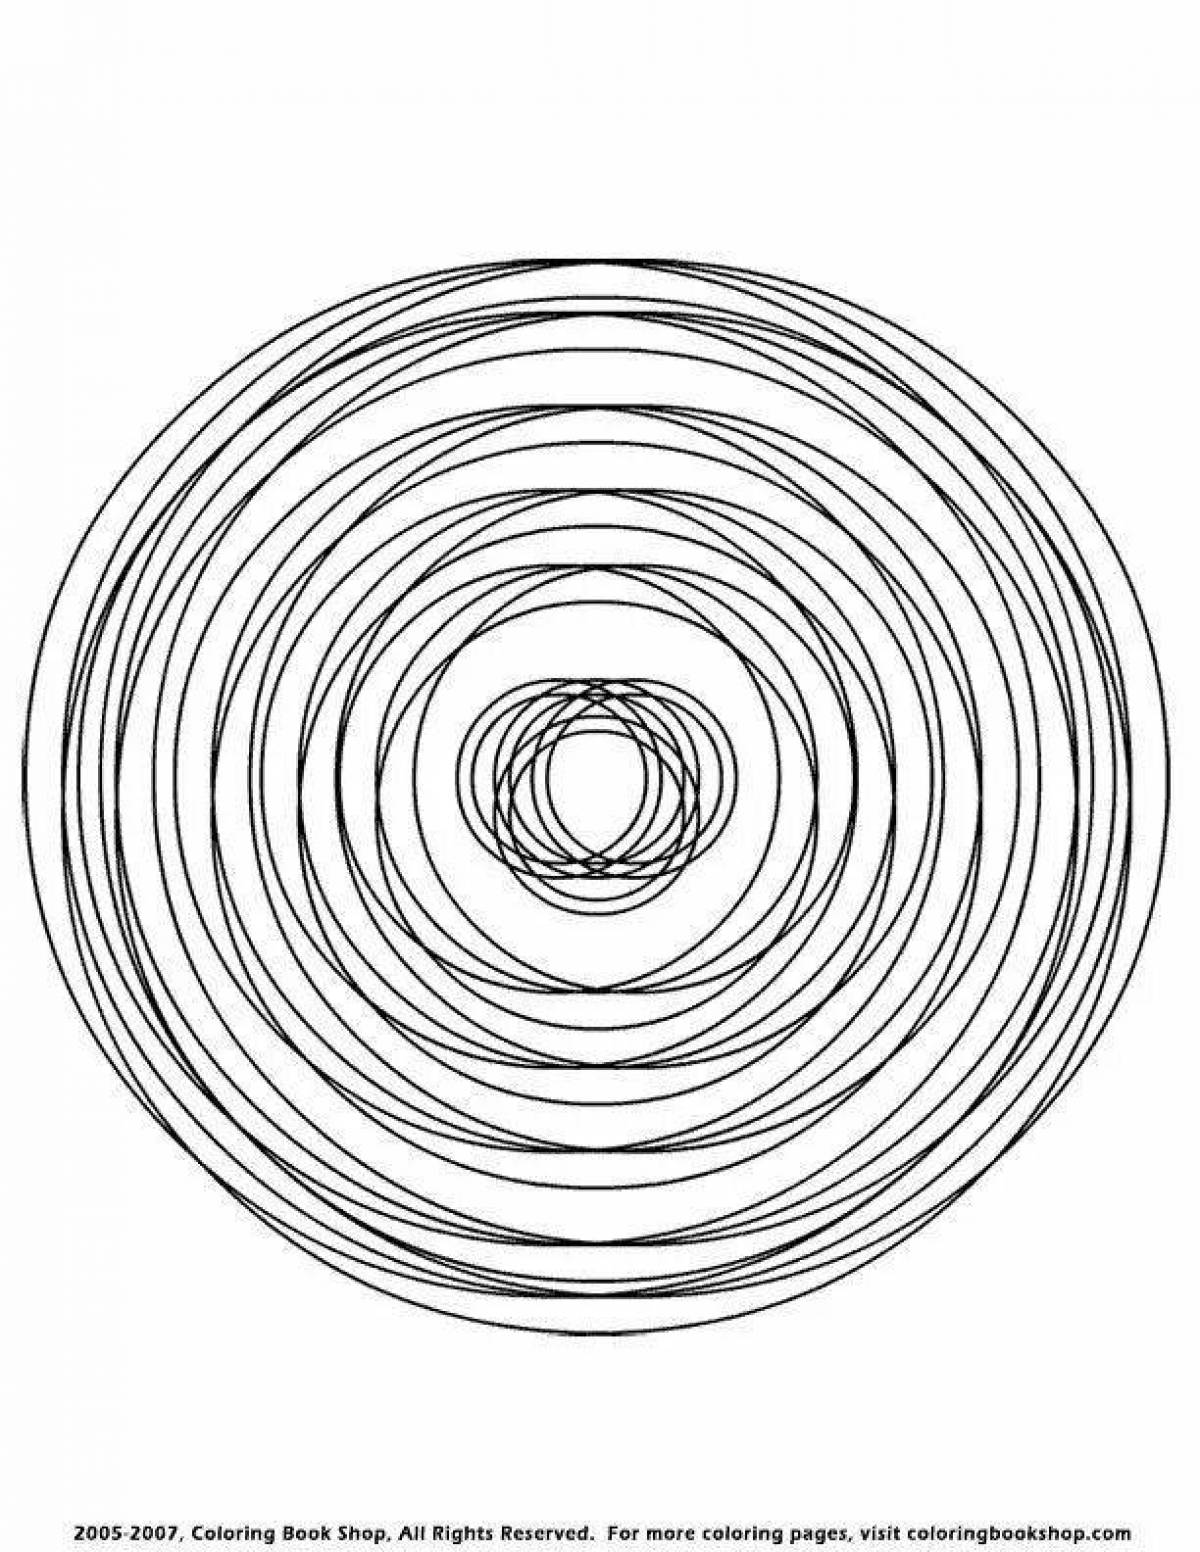 Playful creation of a spiral coloring page